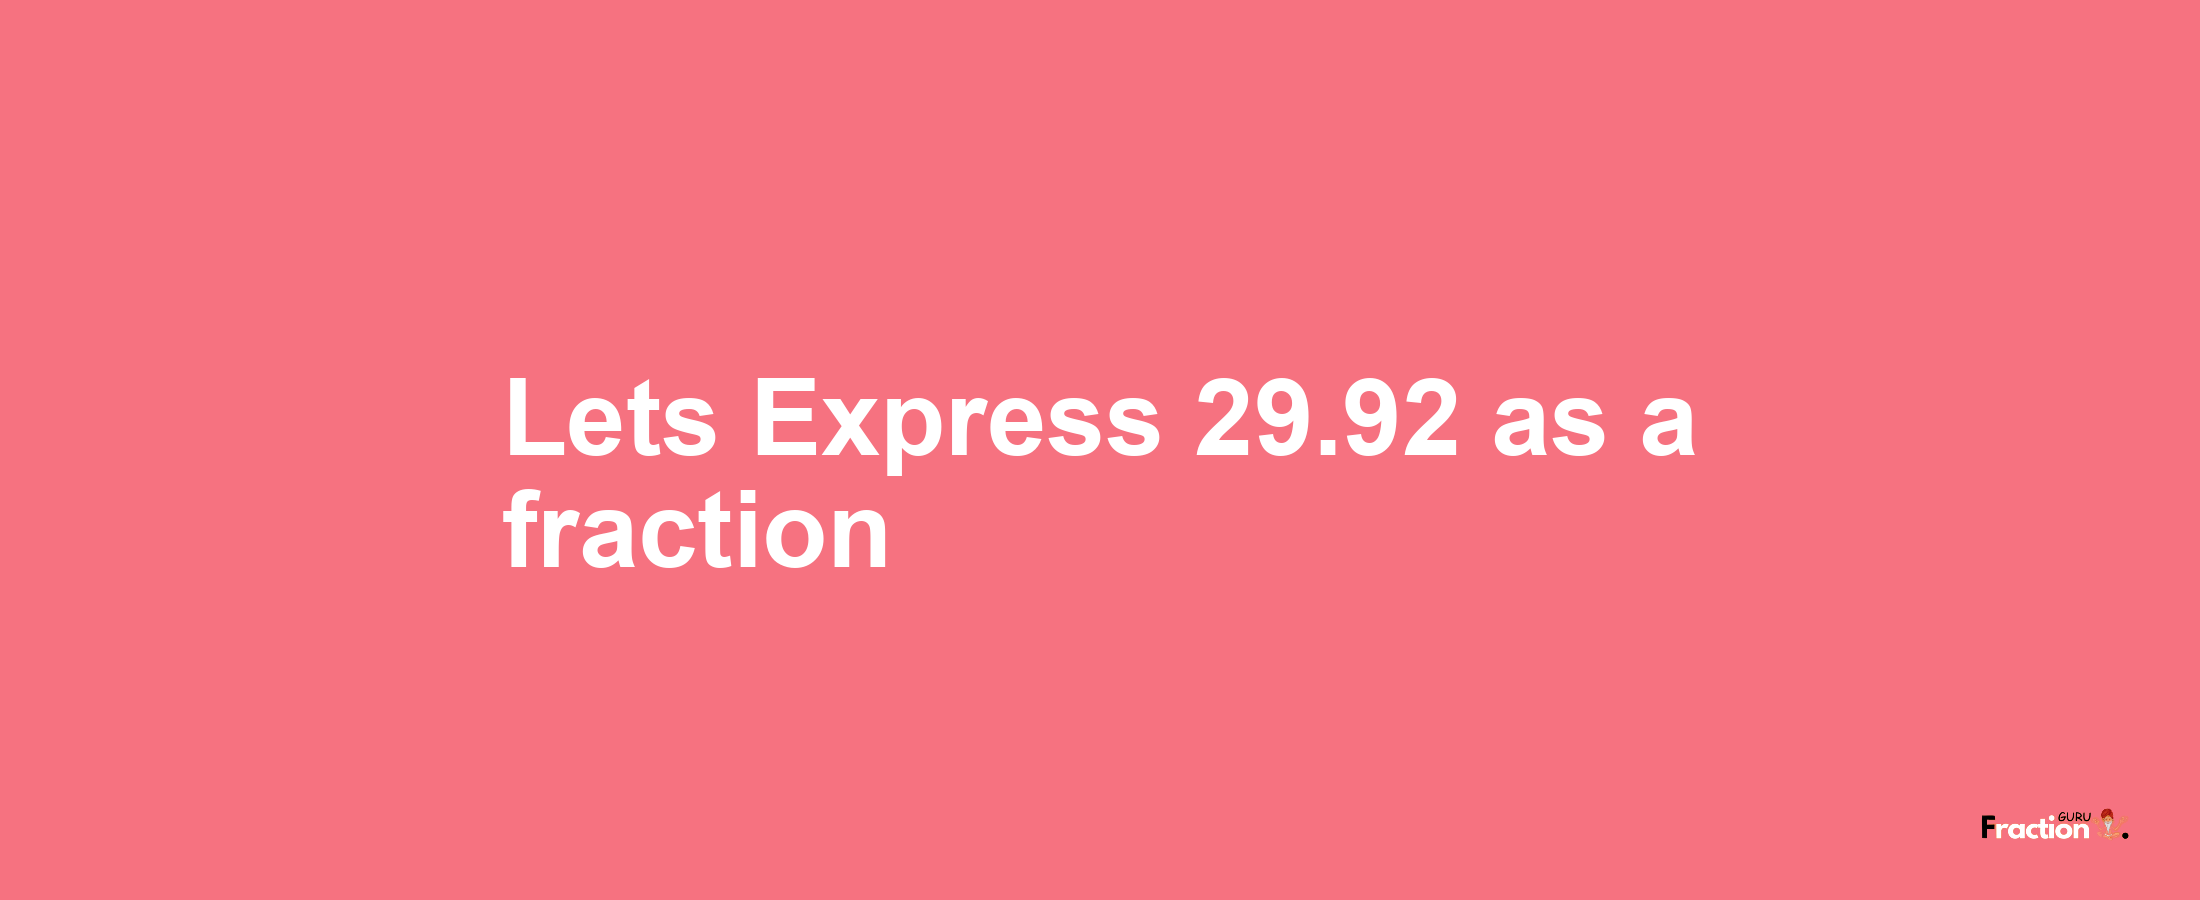 Lets Express 29.92 as afraction